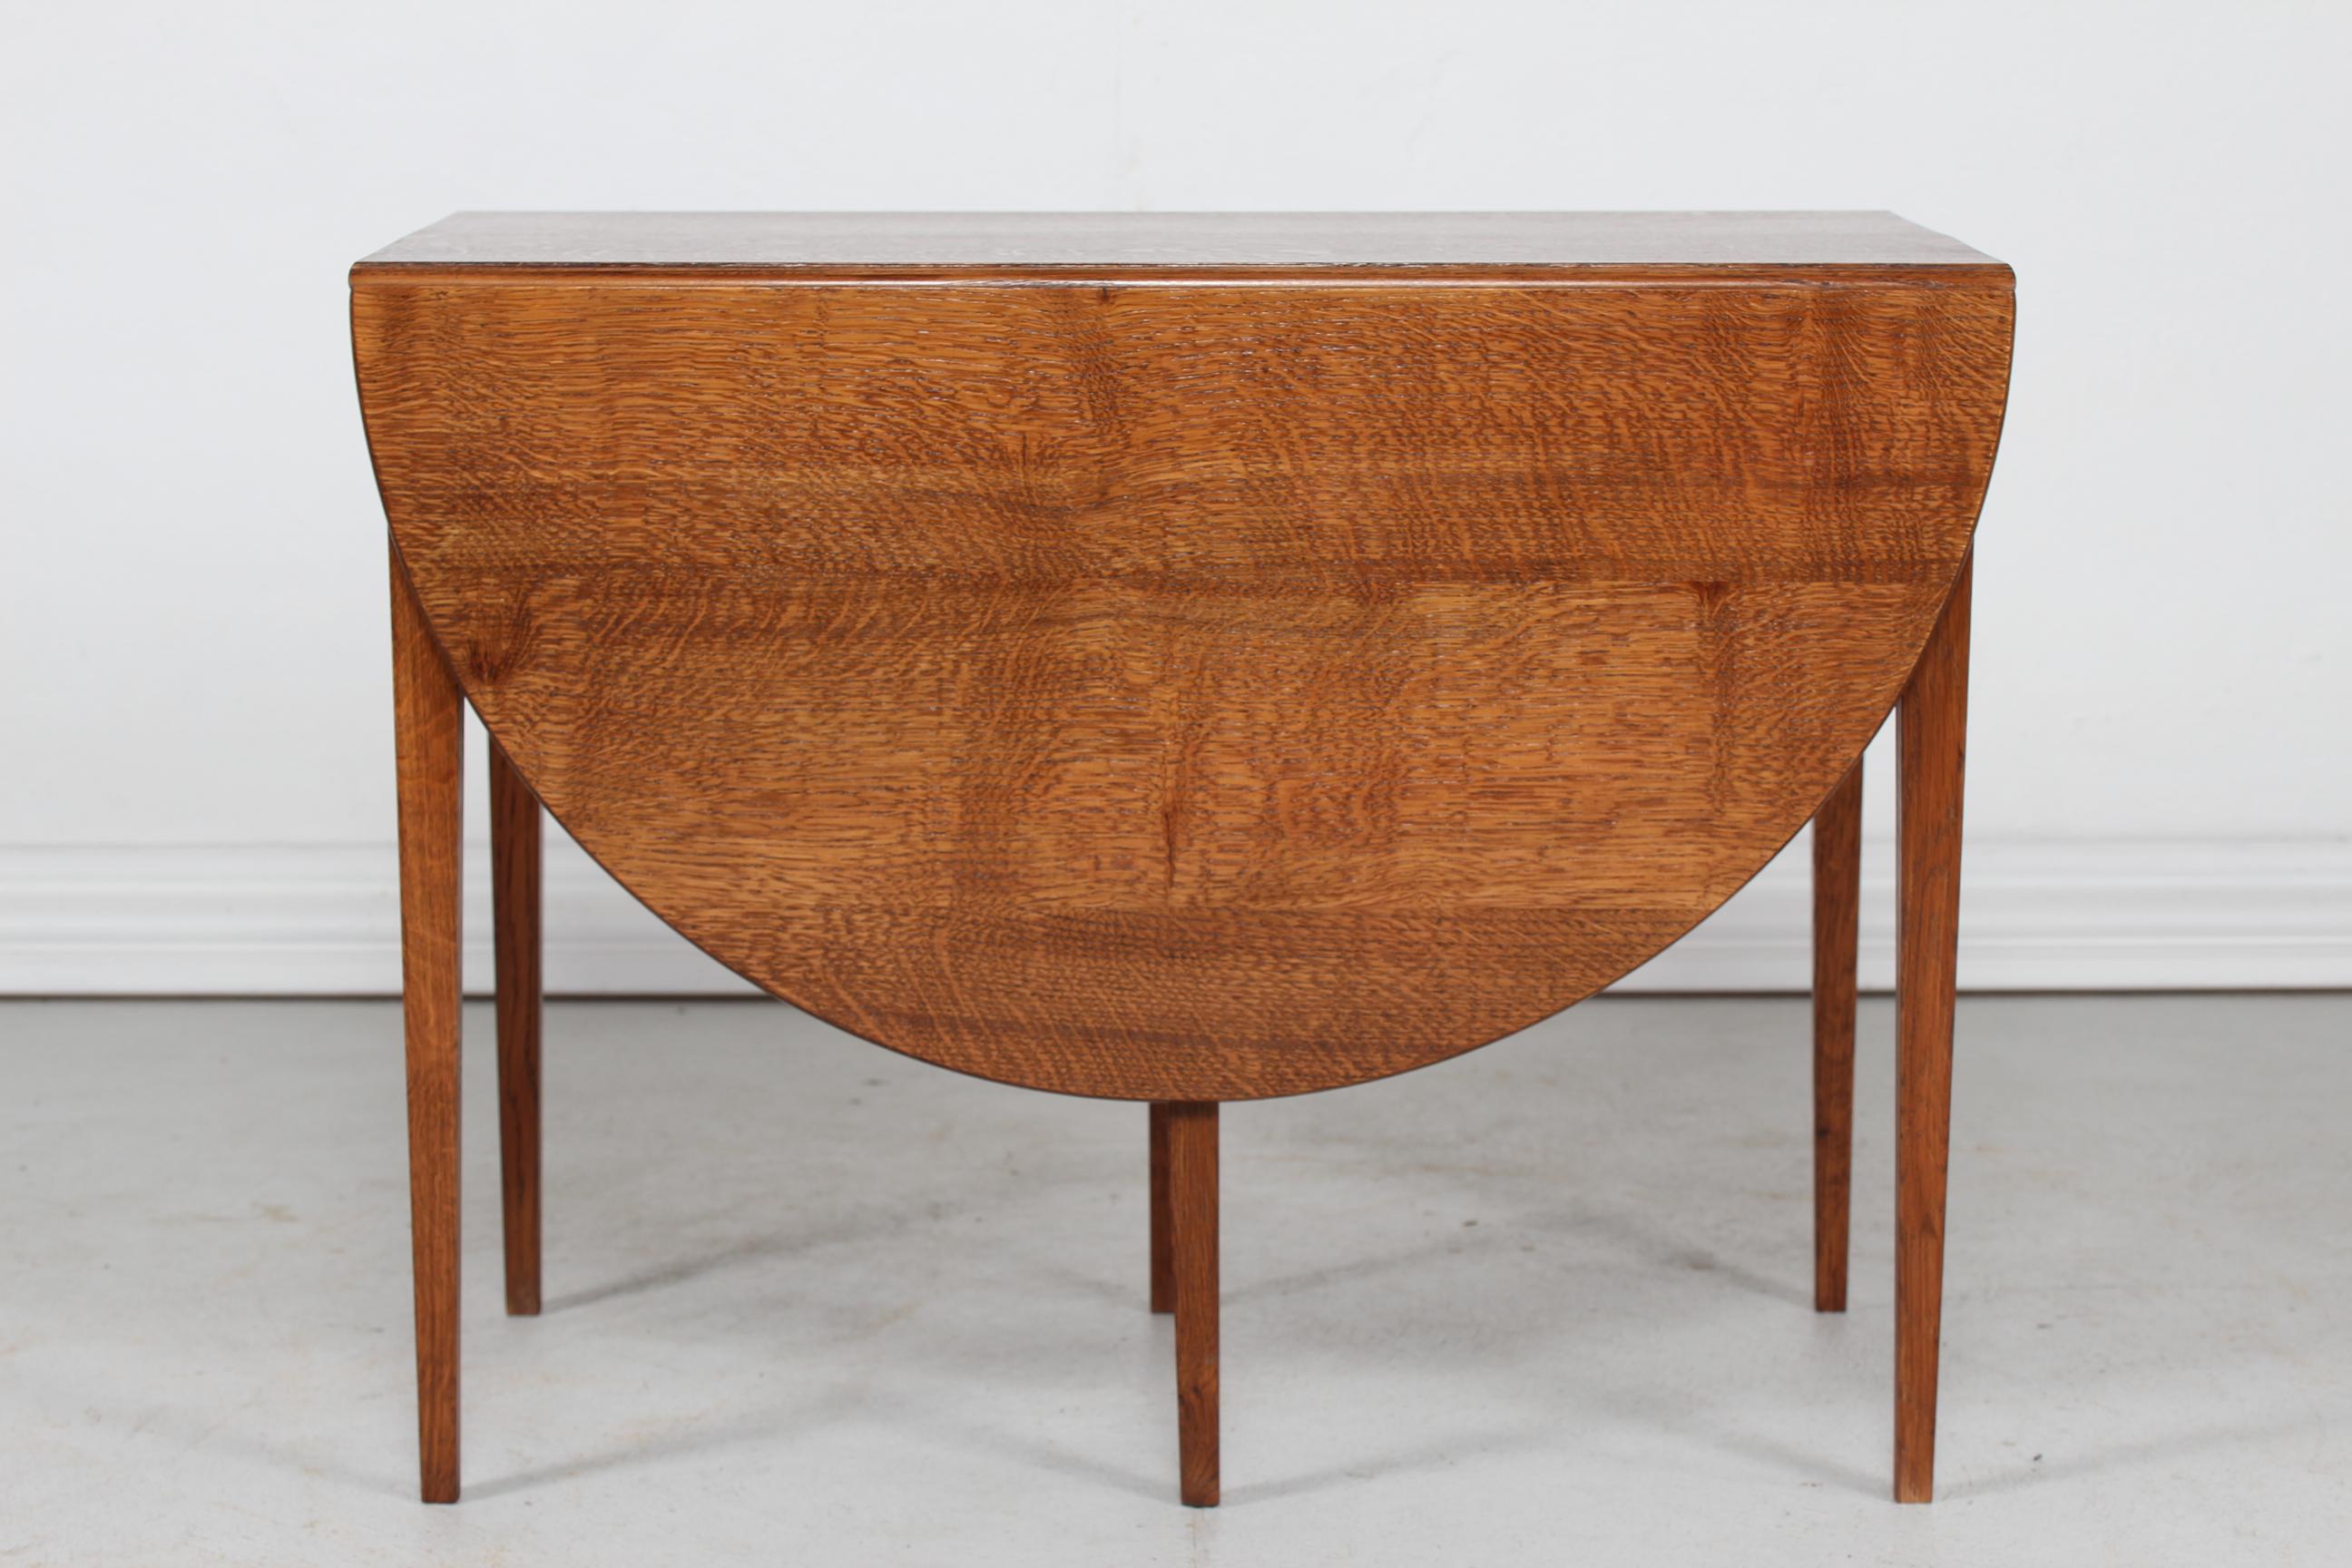 Mid-20th Century Danish Modern Frits Henningsen Coffee Table of Solid Oak with Two Flaps, 1950s